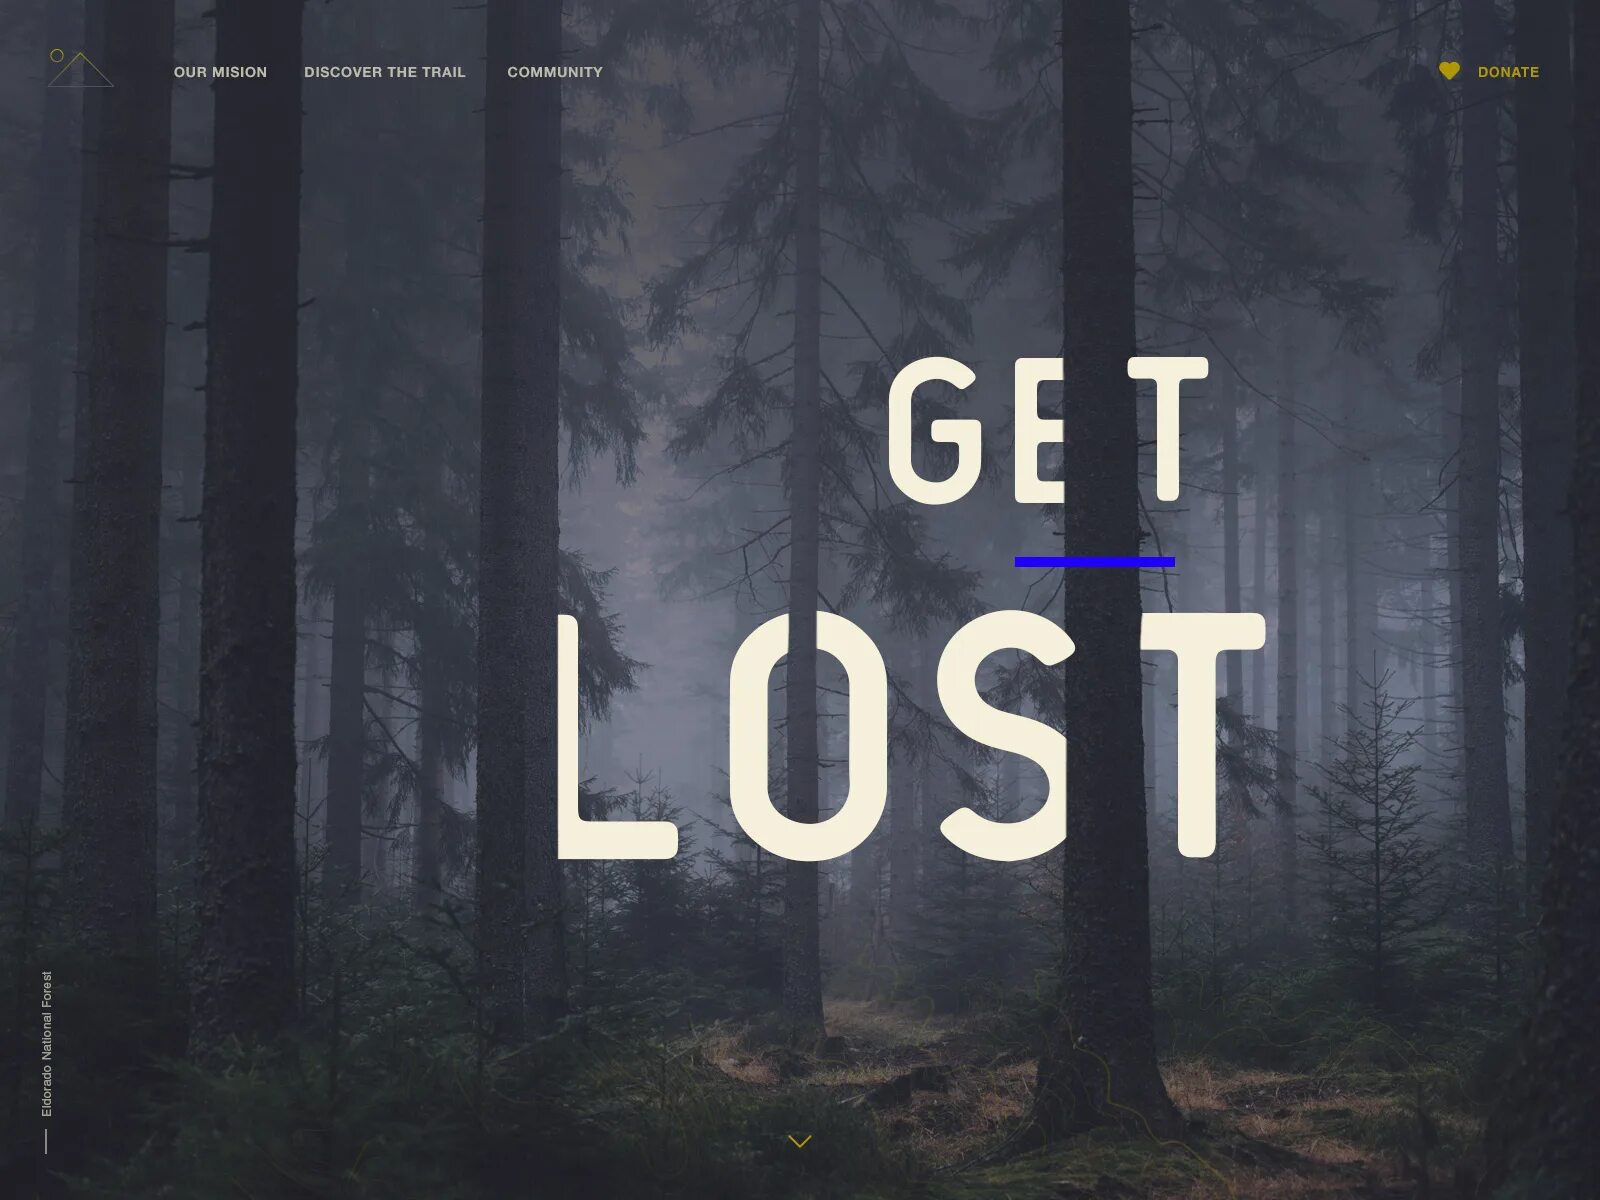 Get Lost. Those who get Lost want to get Lost перевод. Do you get lost